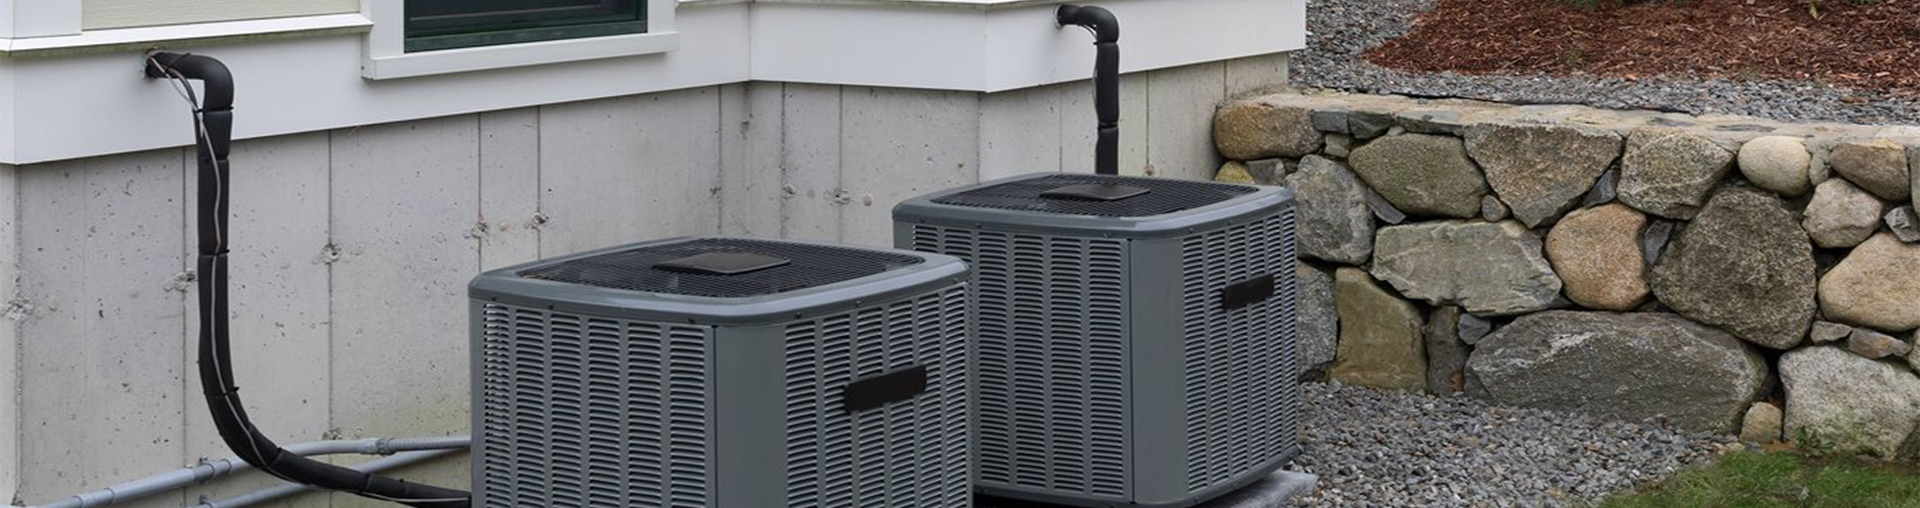 hvac service the woodlands tx, Heating and Air Conditioning (HVAC) Company in The Woodlands, TX